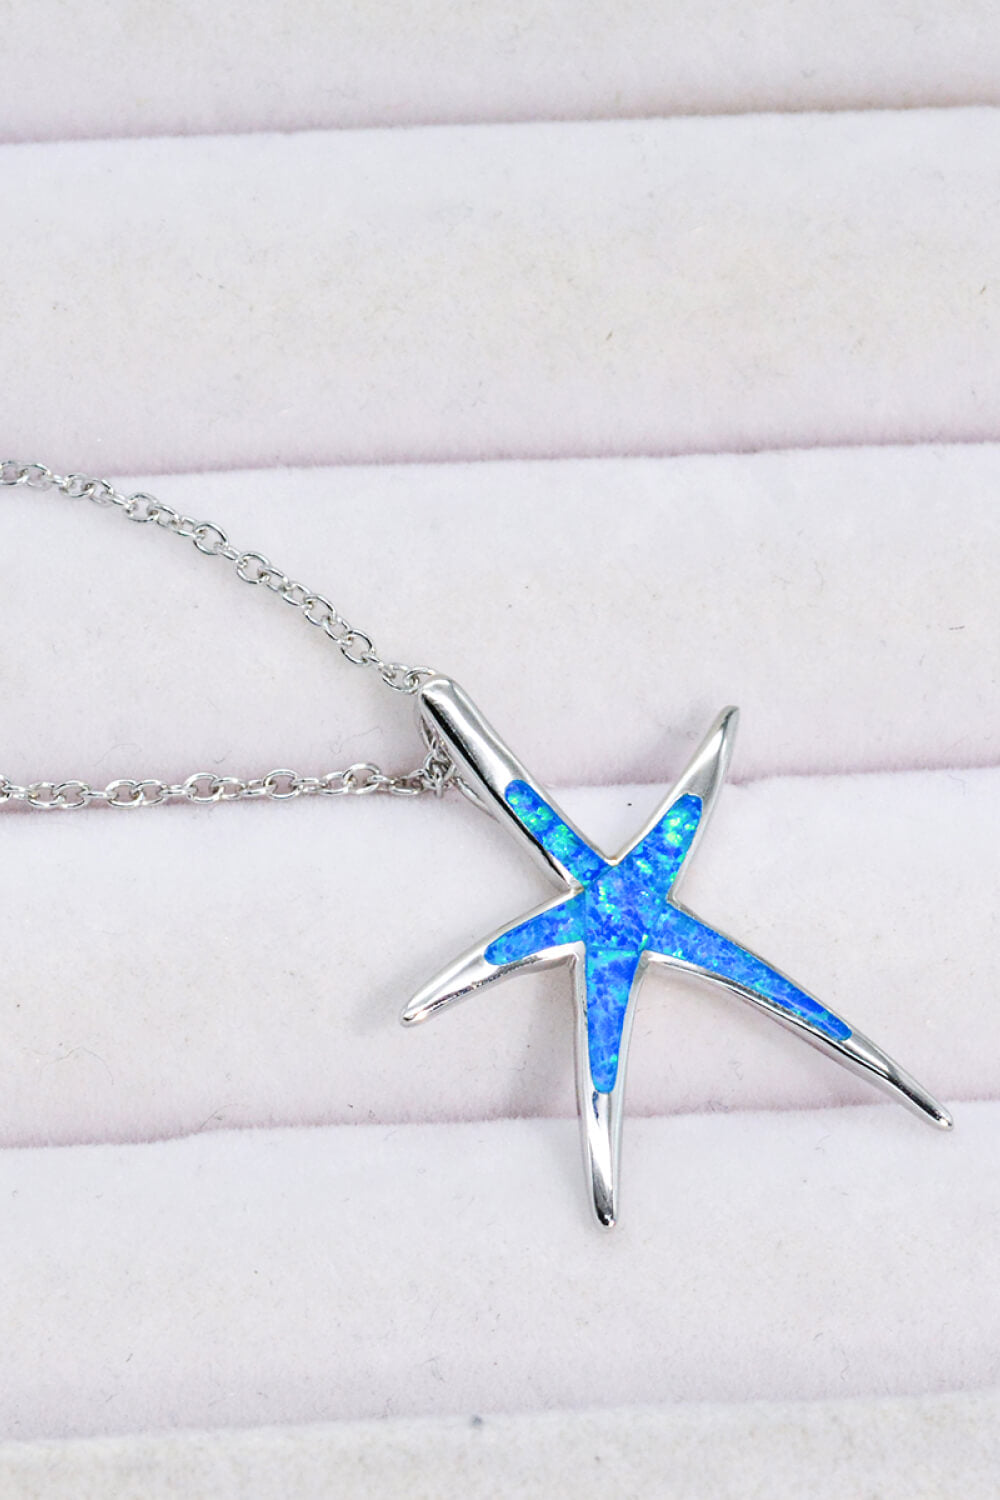 Opal Starfish Pendant Necklace-Necklaces-Inspired by Justeen-Women's Clothing Boutique in Chicago, Illinois